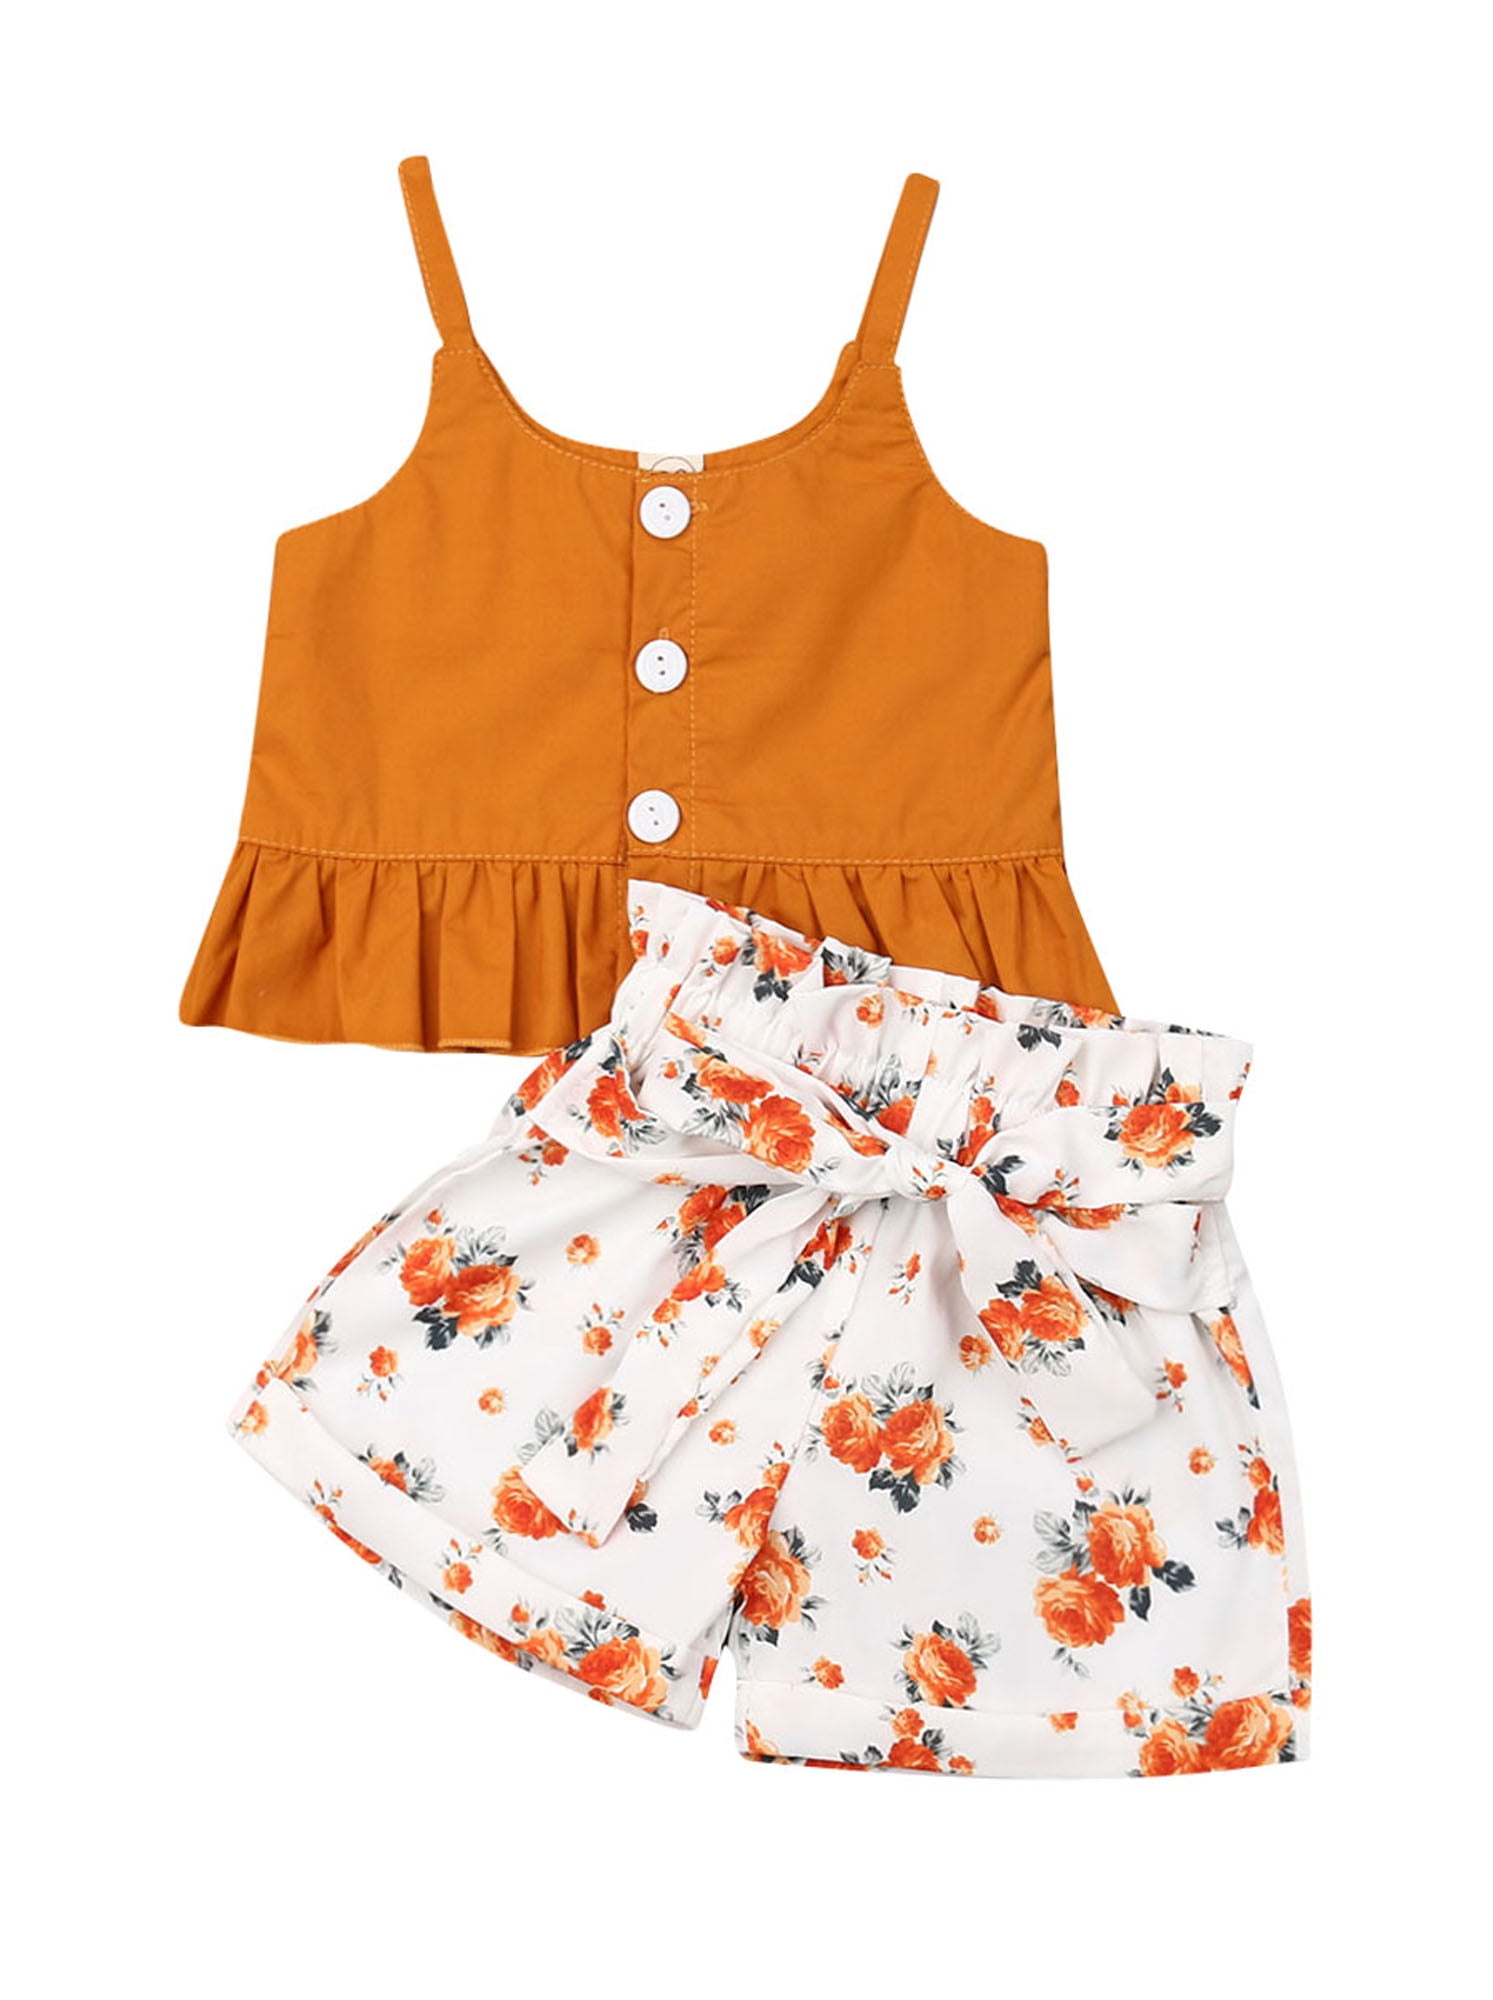 Sleeveless Striped Flower Top Vest Children Kid Clothes/2PC Summer Outfits Set for Girls Age 2 3 4 5 6 Years Old Shorts 